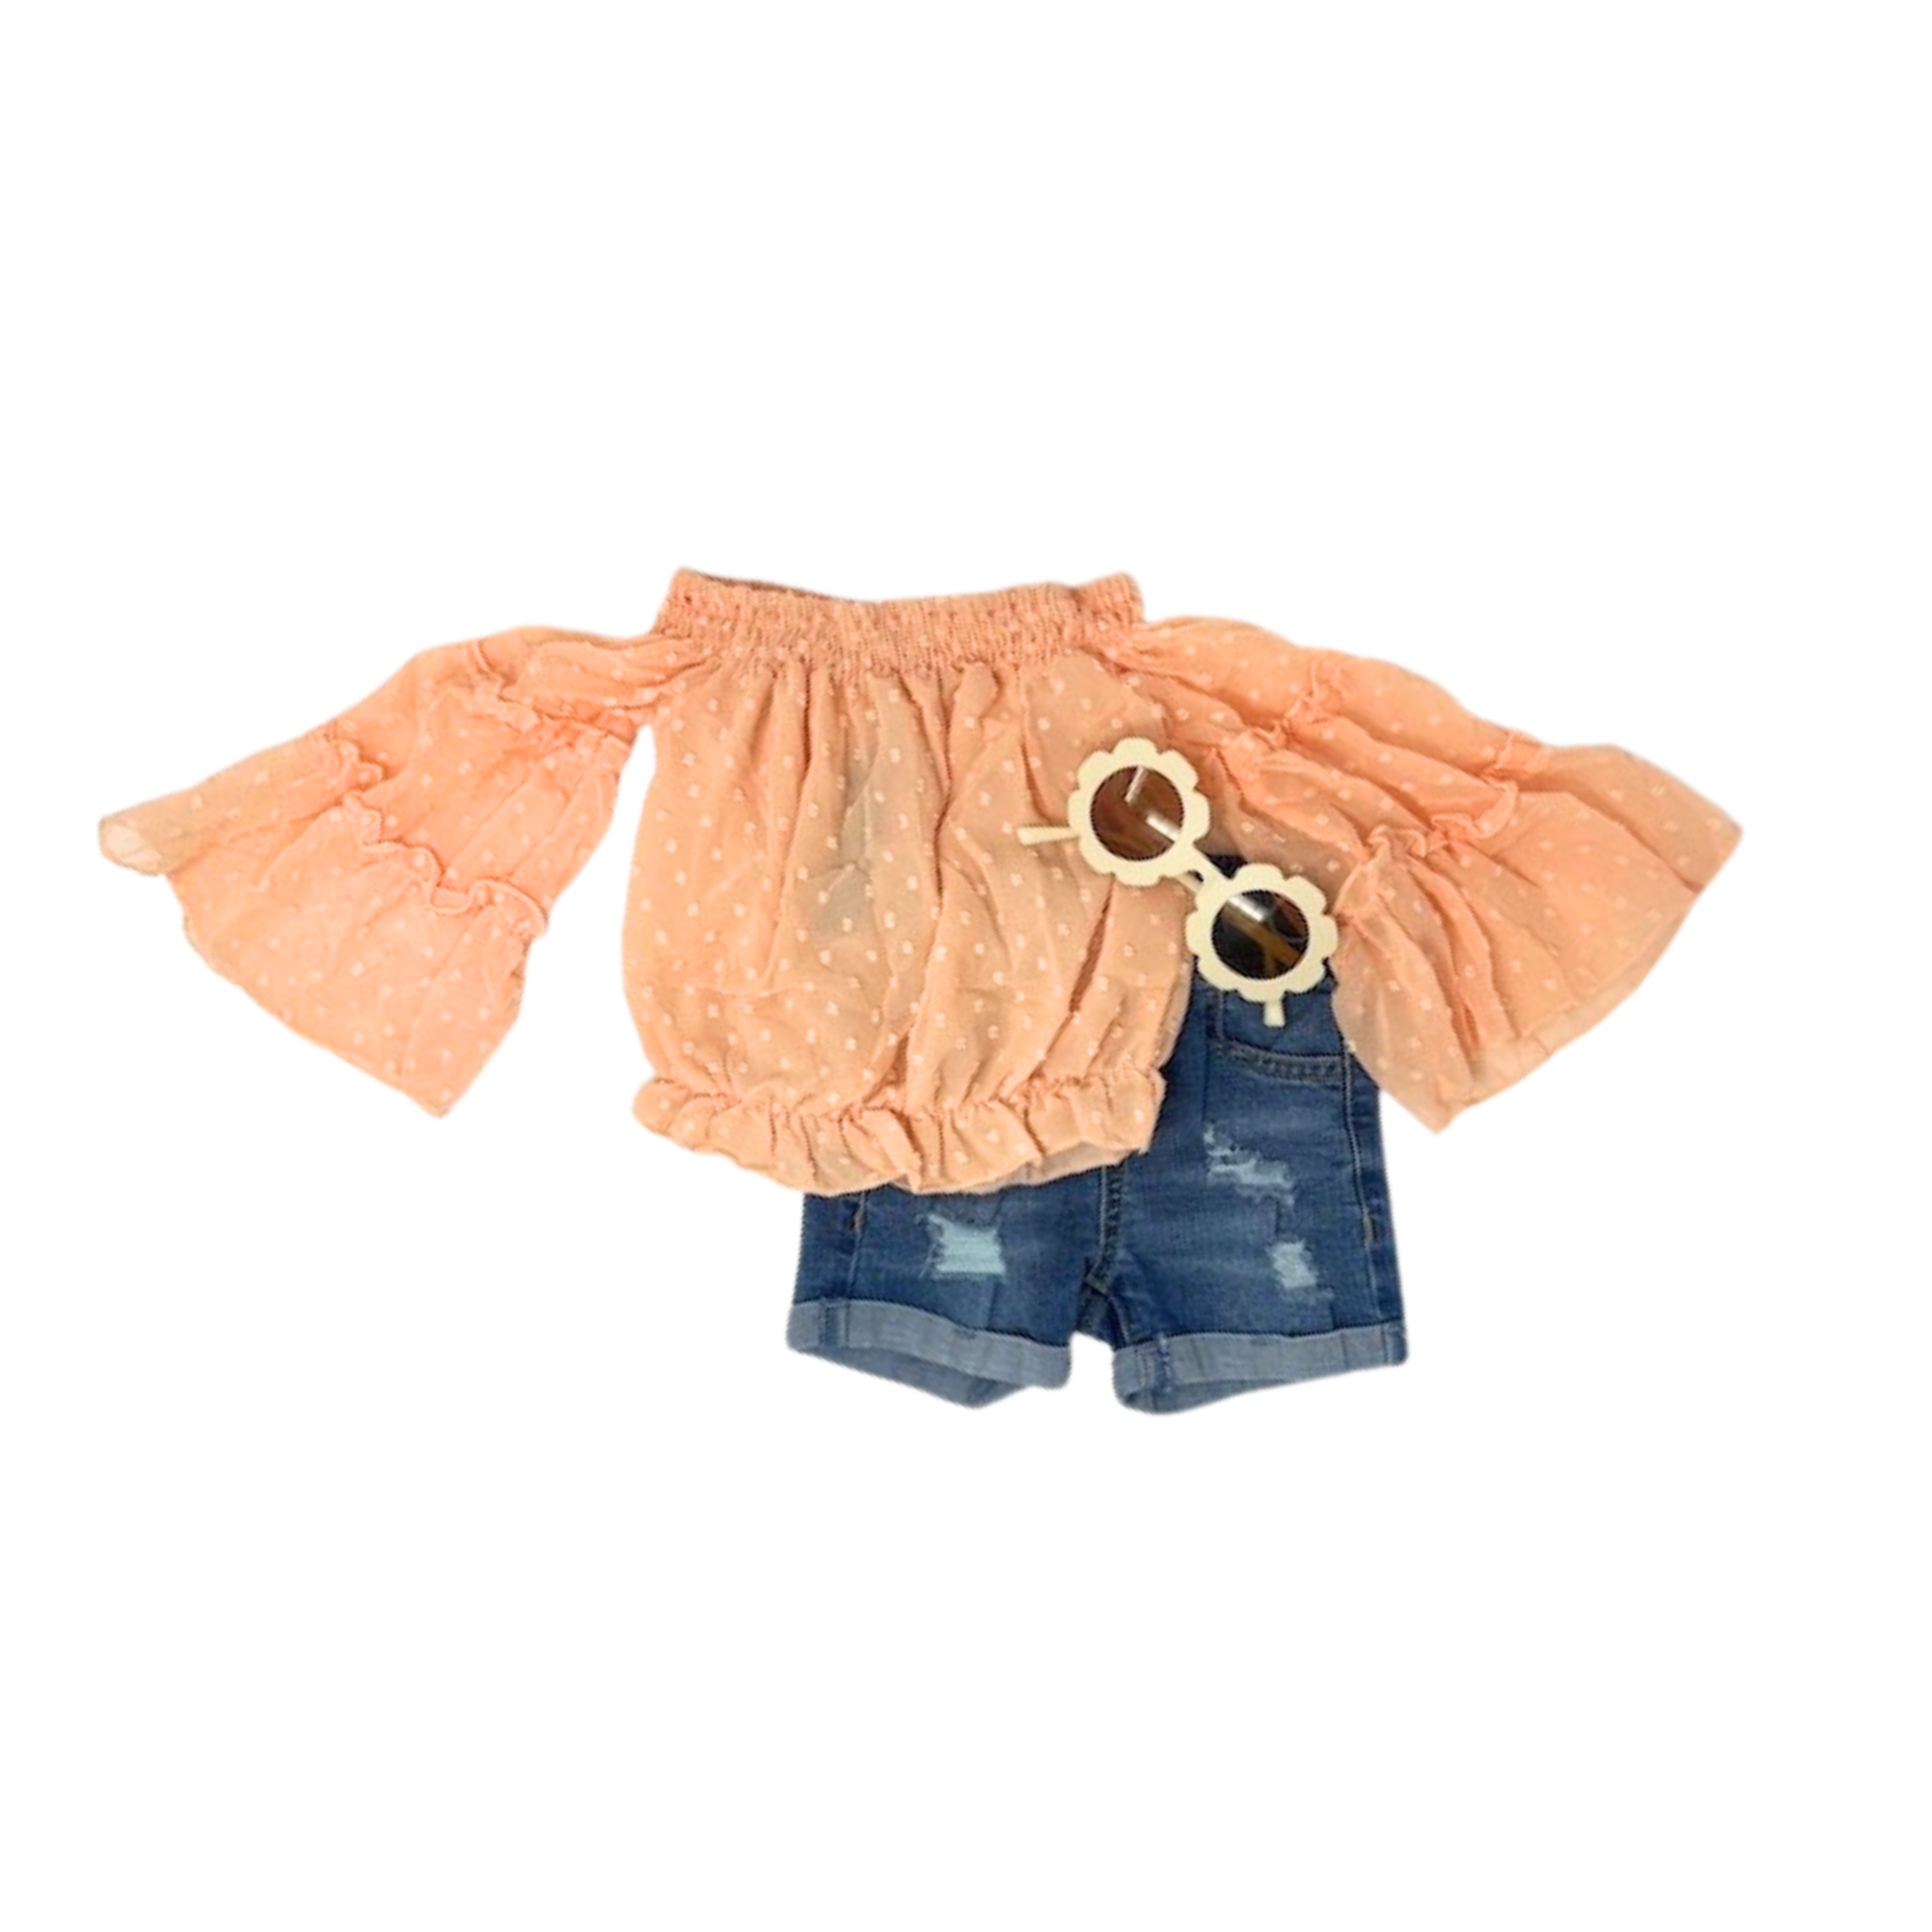 Chloe cinched crop waist and off-the-shoulder flair Sleeve Top in Orange paired with kids jean shorts and Sunglasses